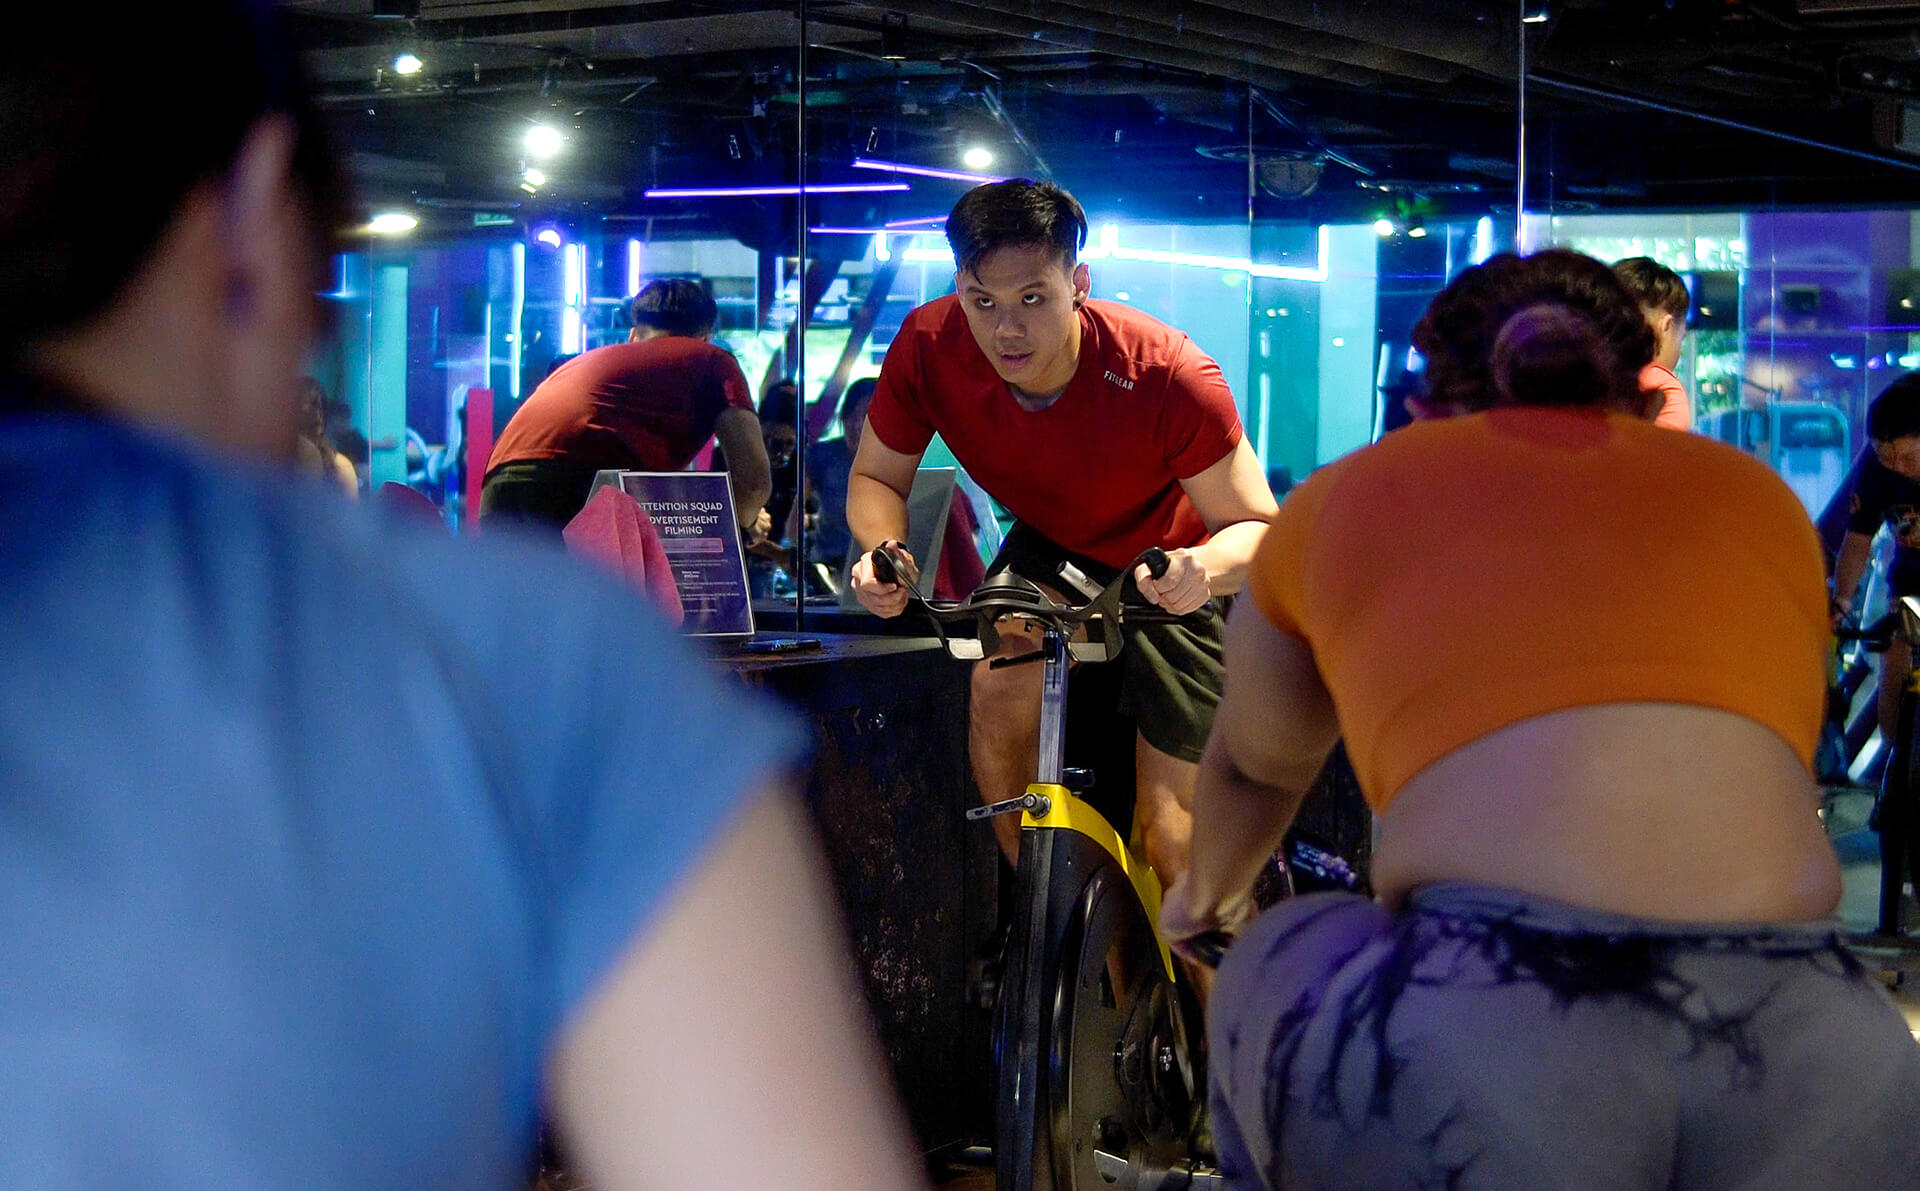 One of the unique aspects of spin is its immersive atmosphere, powered by high-energy tracks, dynamic trainers and rhythmic lights.